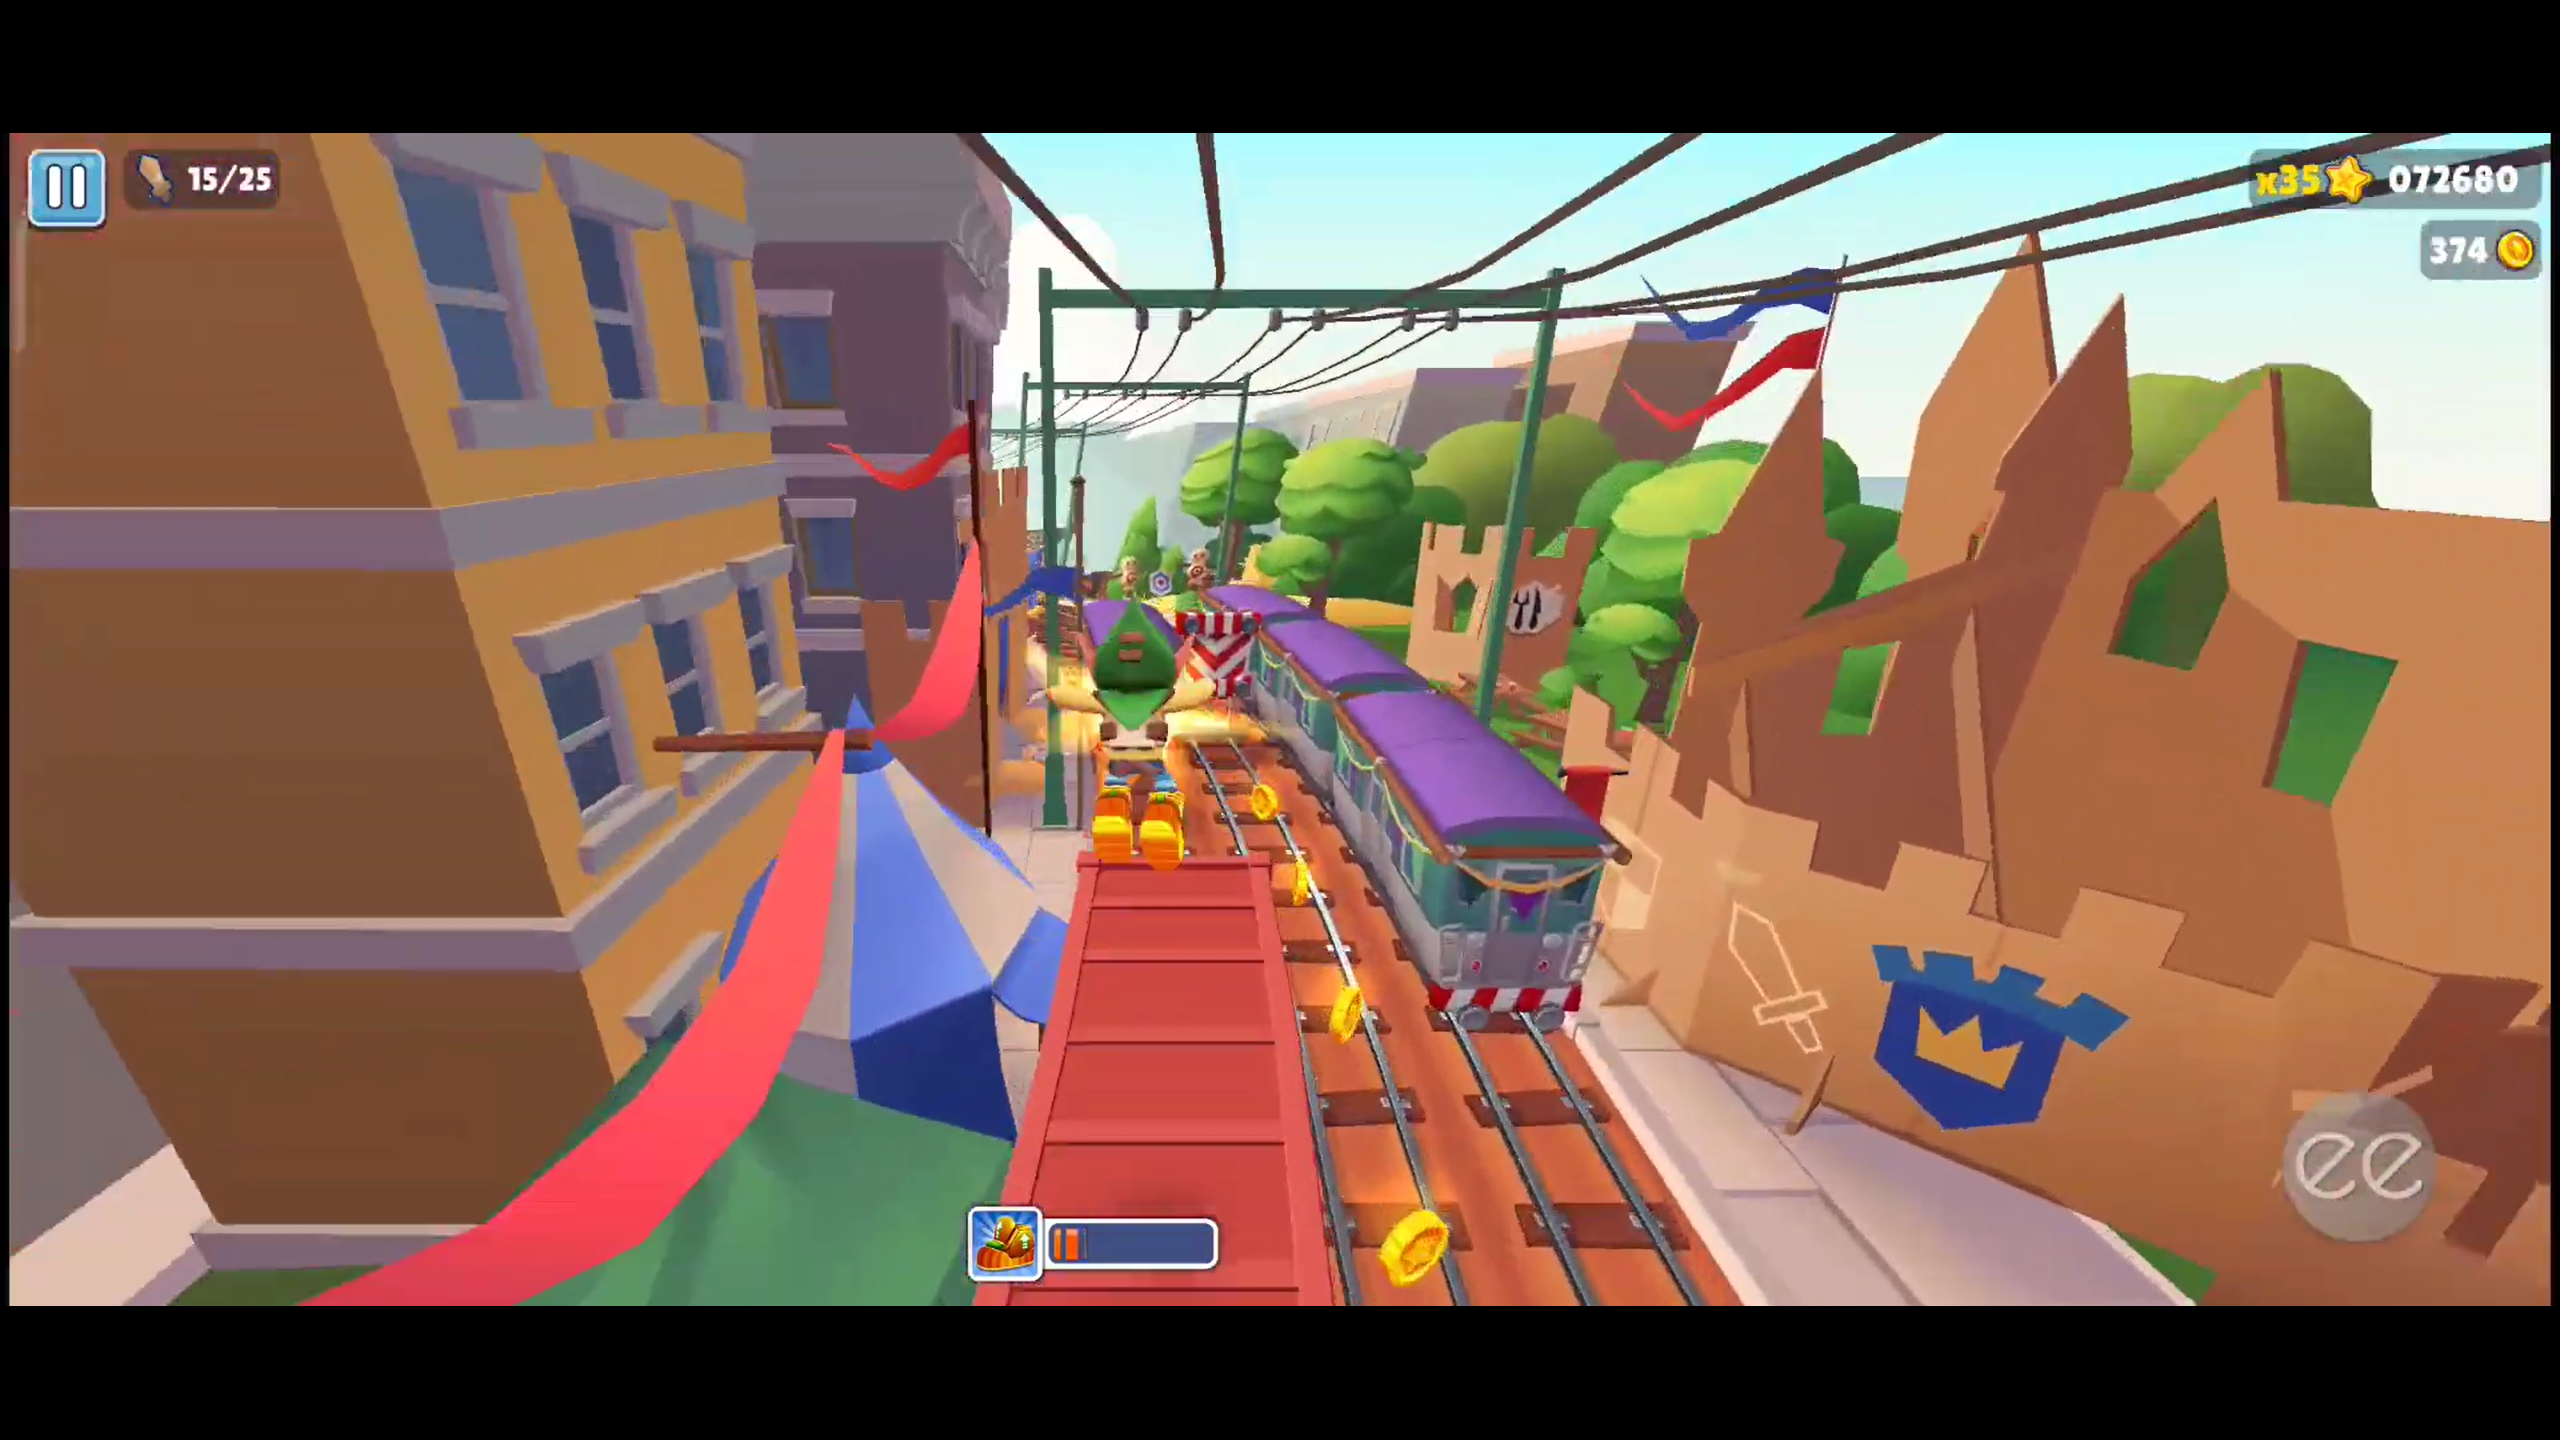 Subway Surfers Game Play in poki.com {computer} 